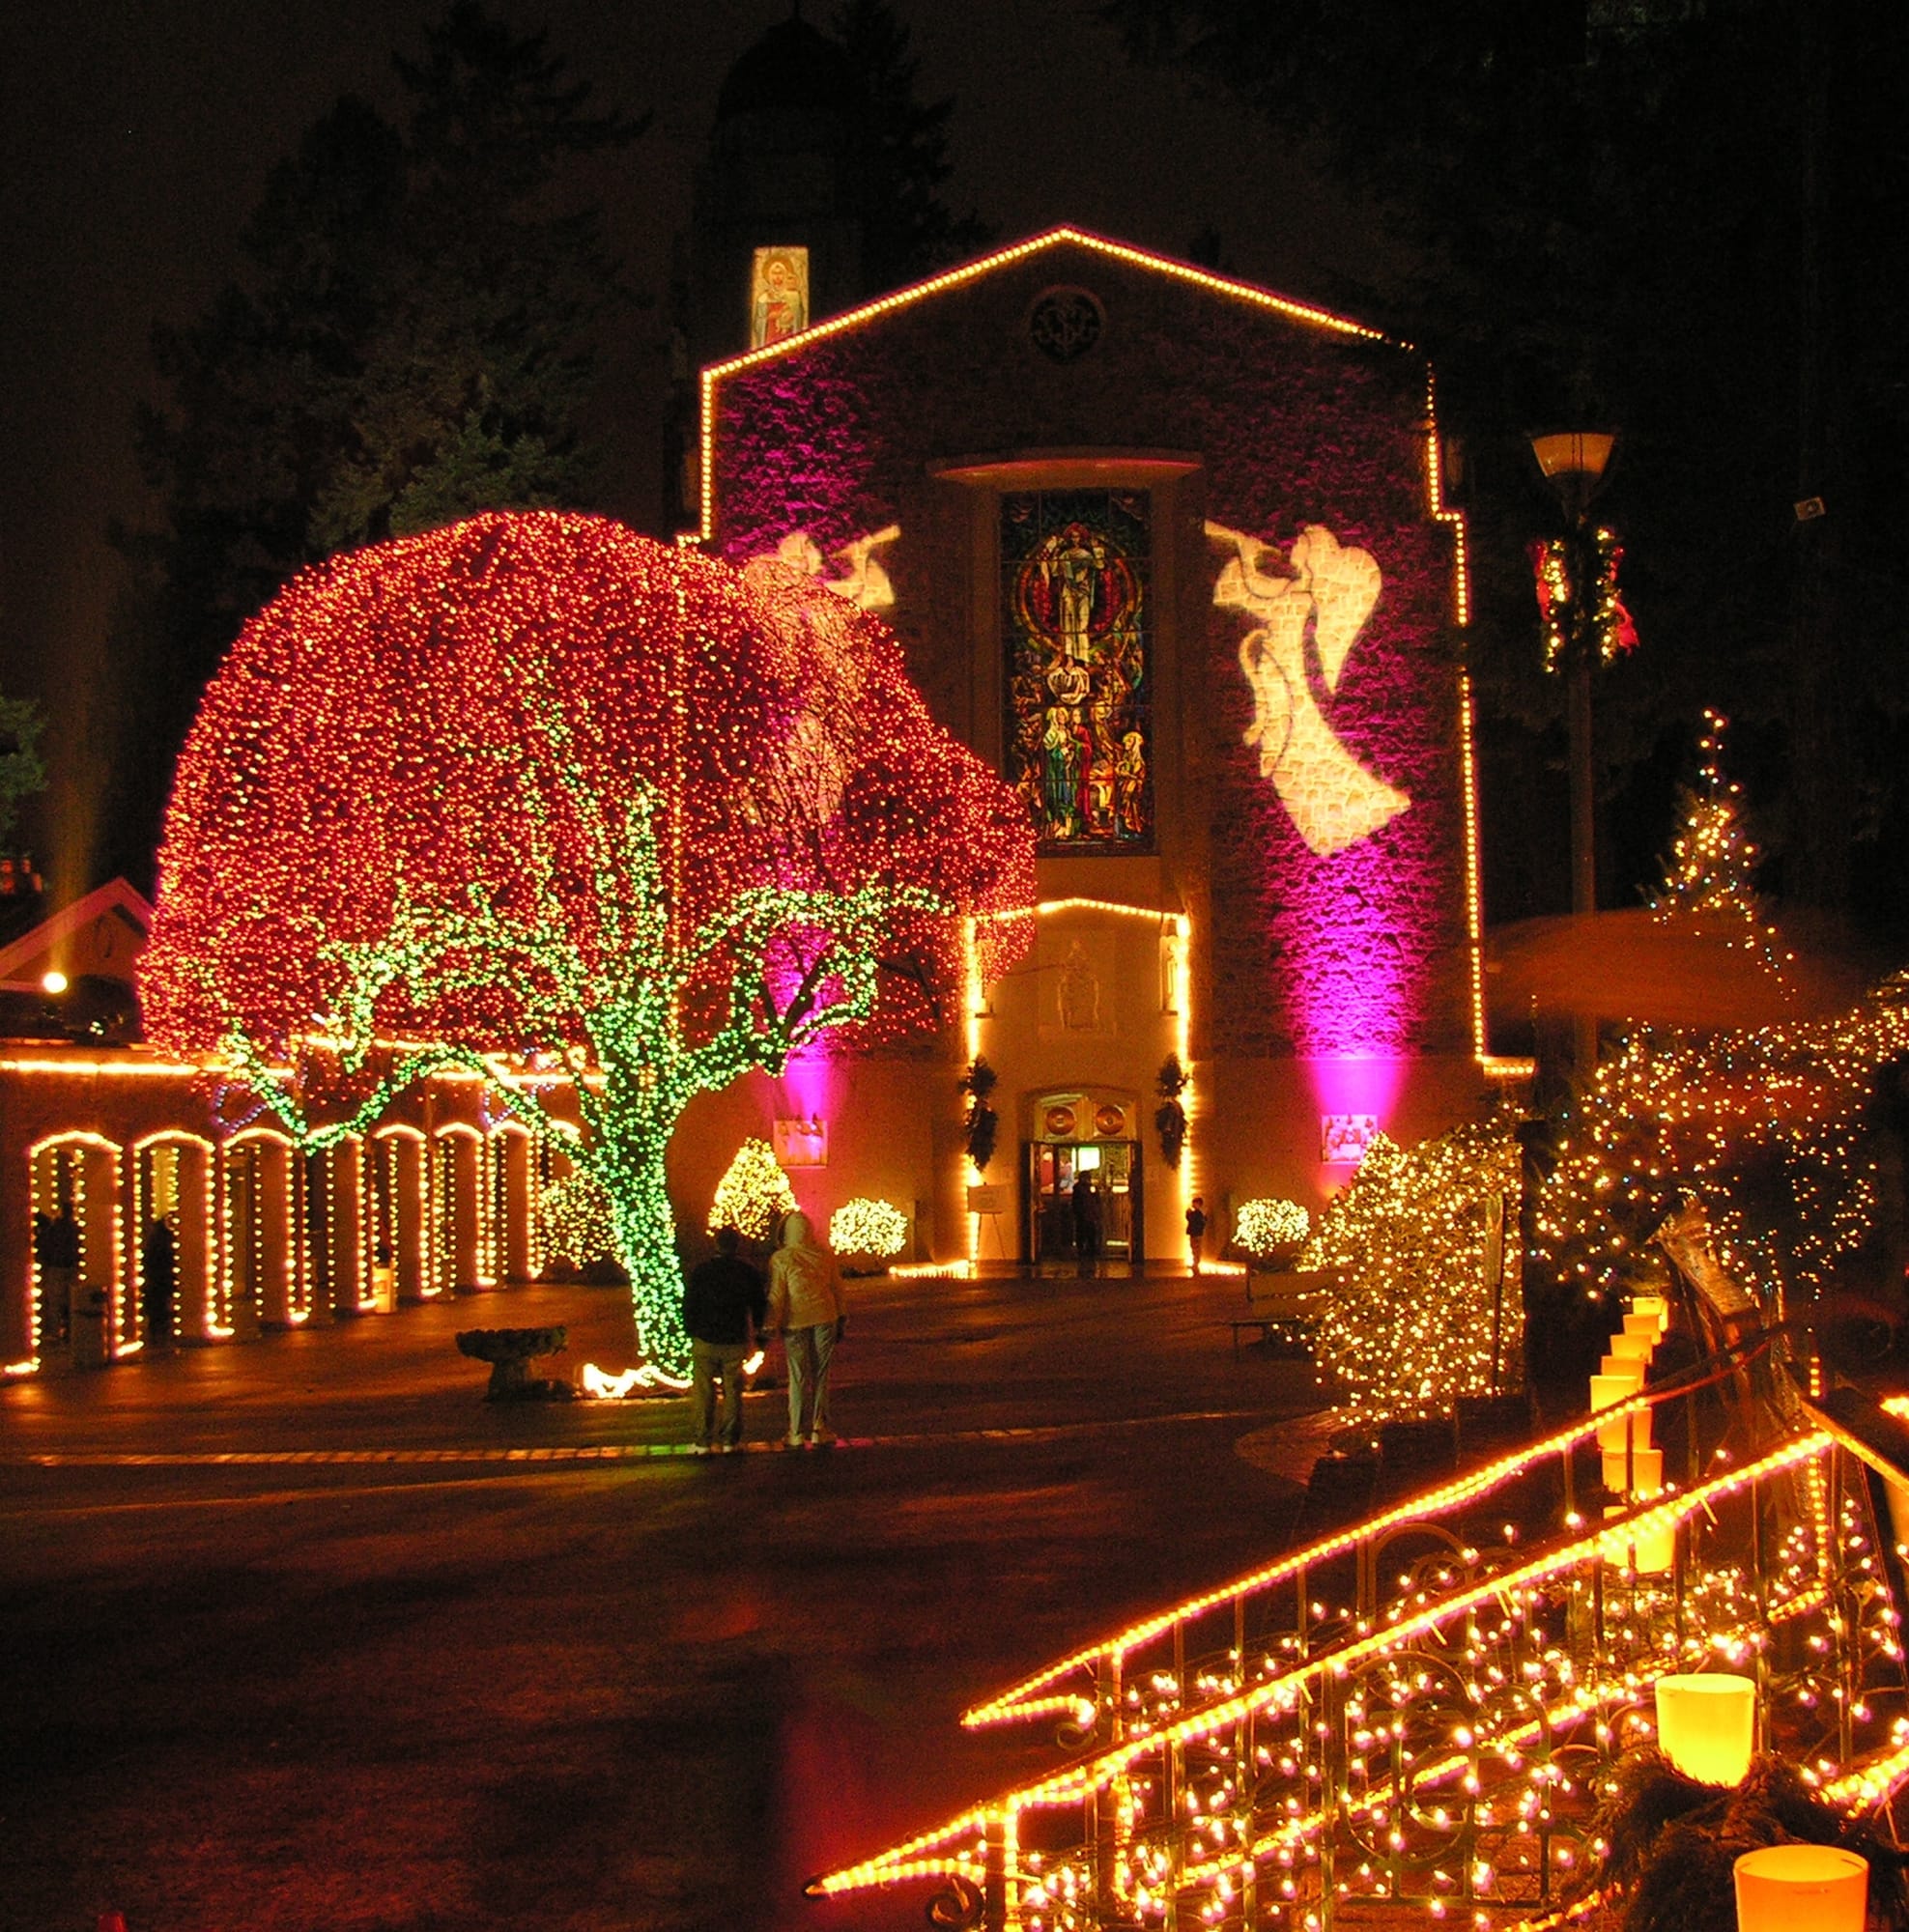 The Christmas Festival of Lights takes place through Dec. 30 at the Grotto in Portland.